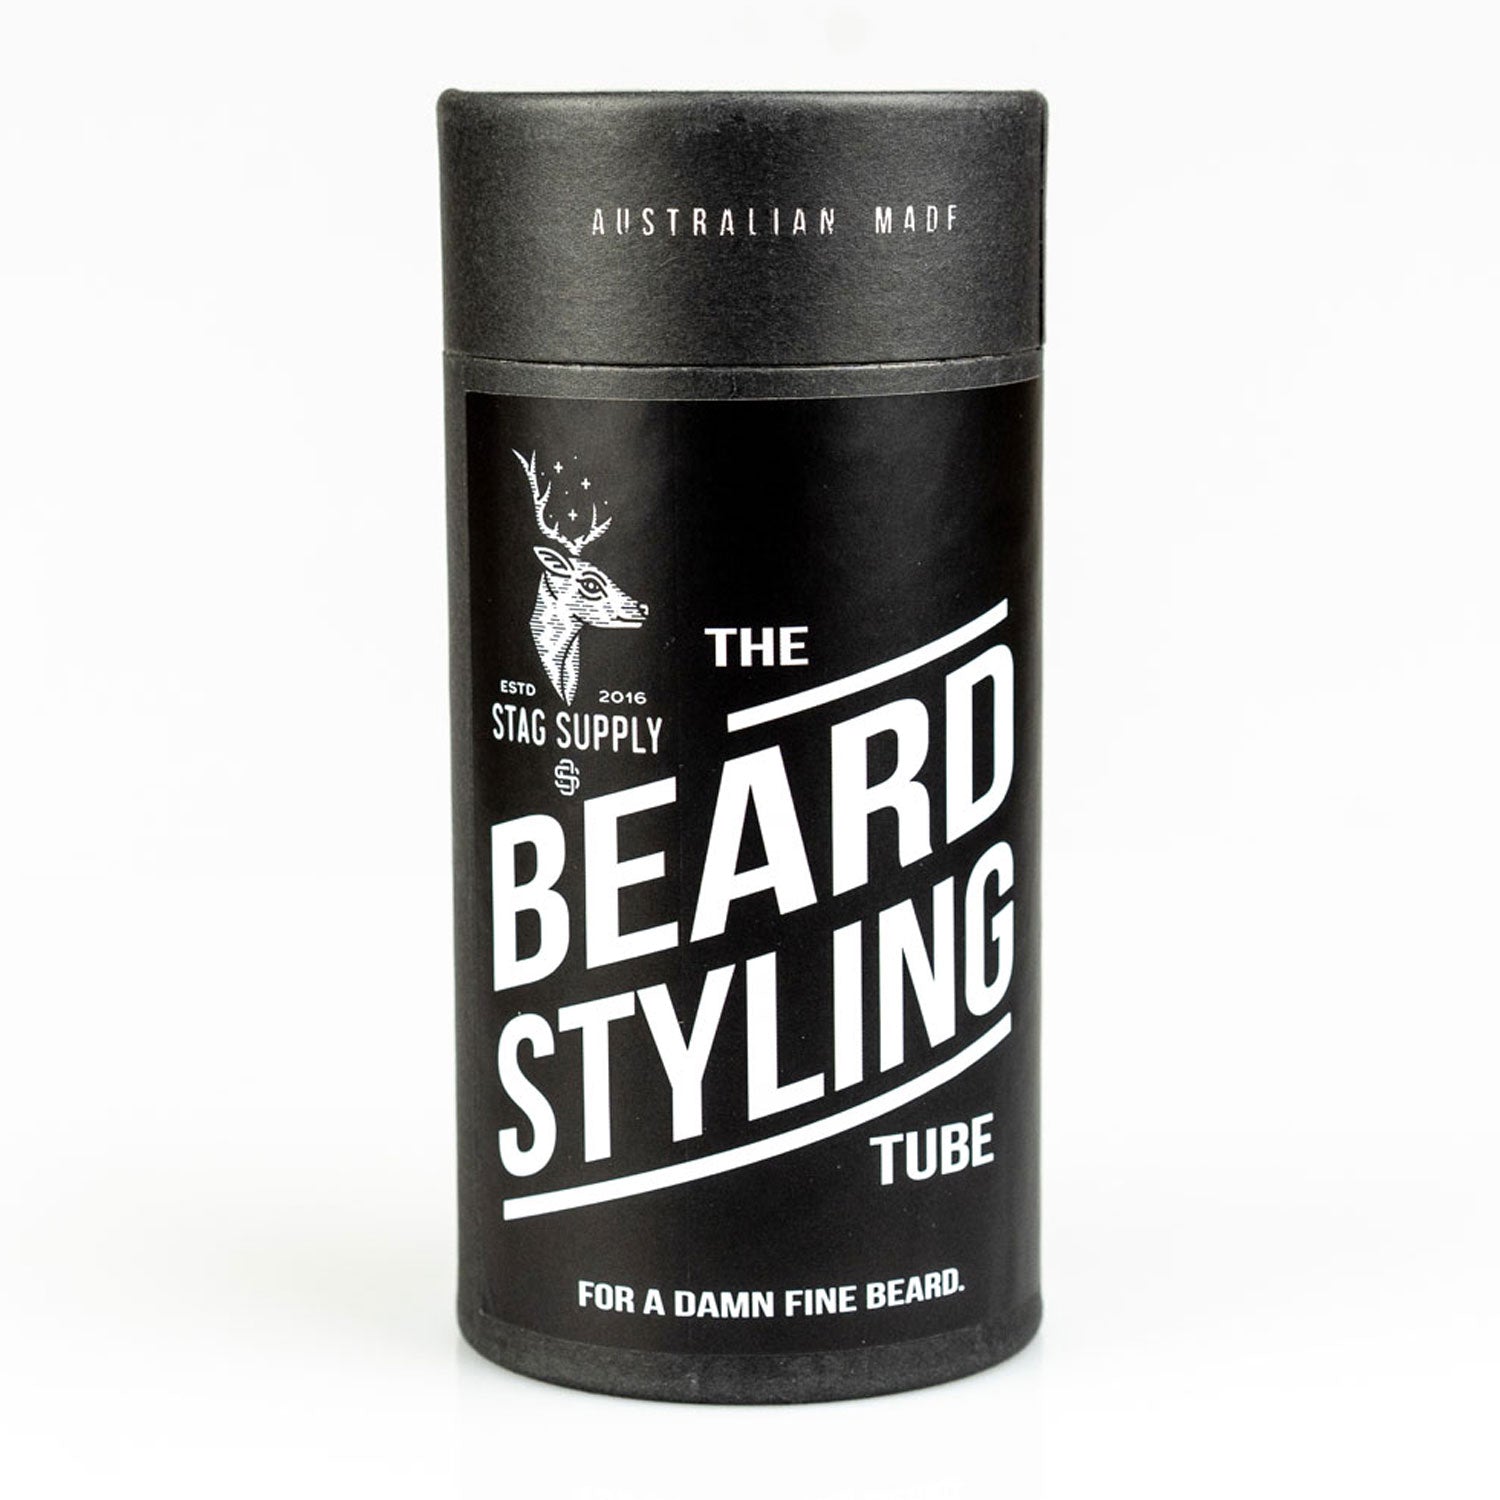 Stag Supply Beard Styling Tube Gift Pack - Orcadia